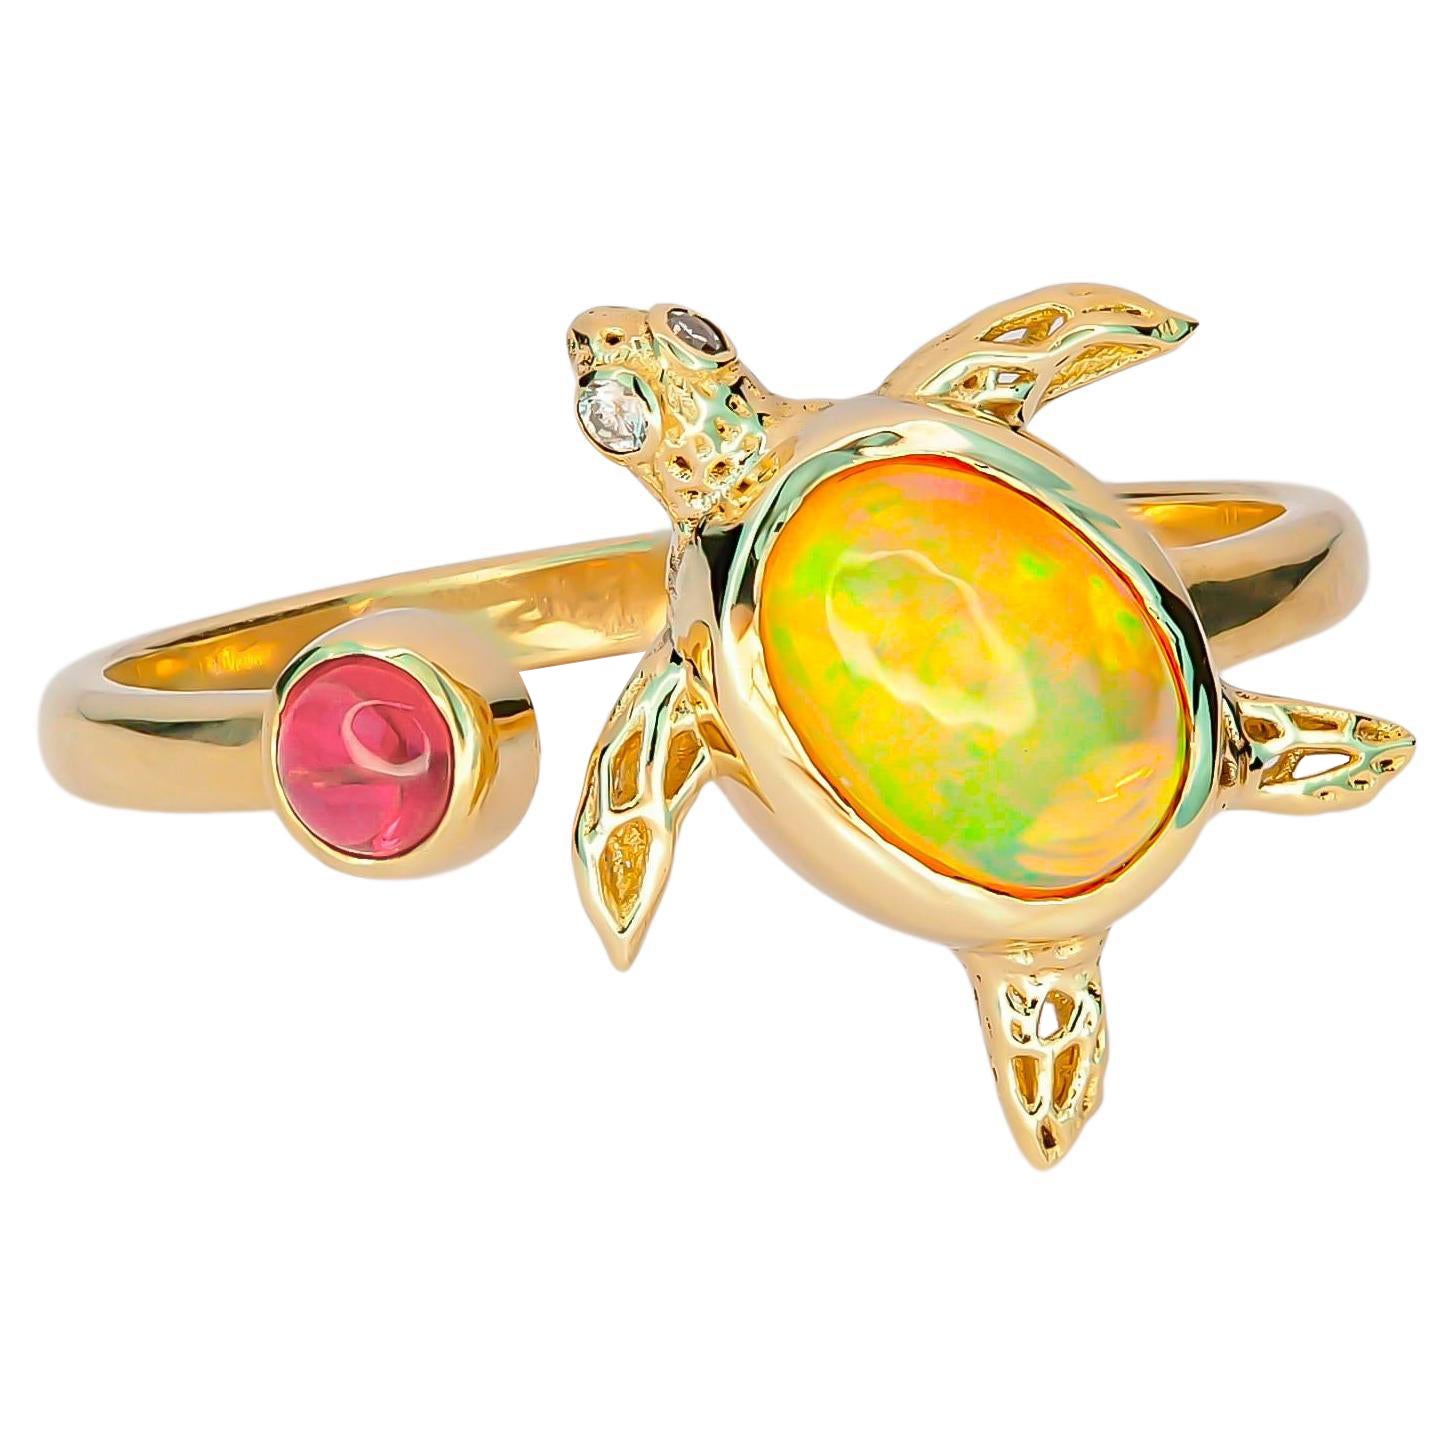 For Sale:  14k Gold Ring with Opal, Ruby and Diamonds, Turtle Ring!